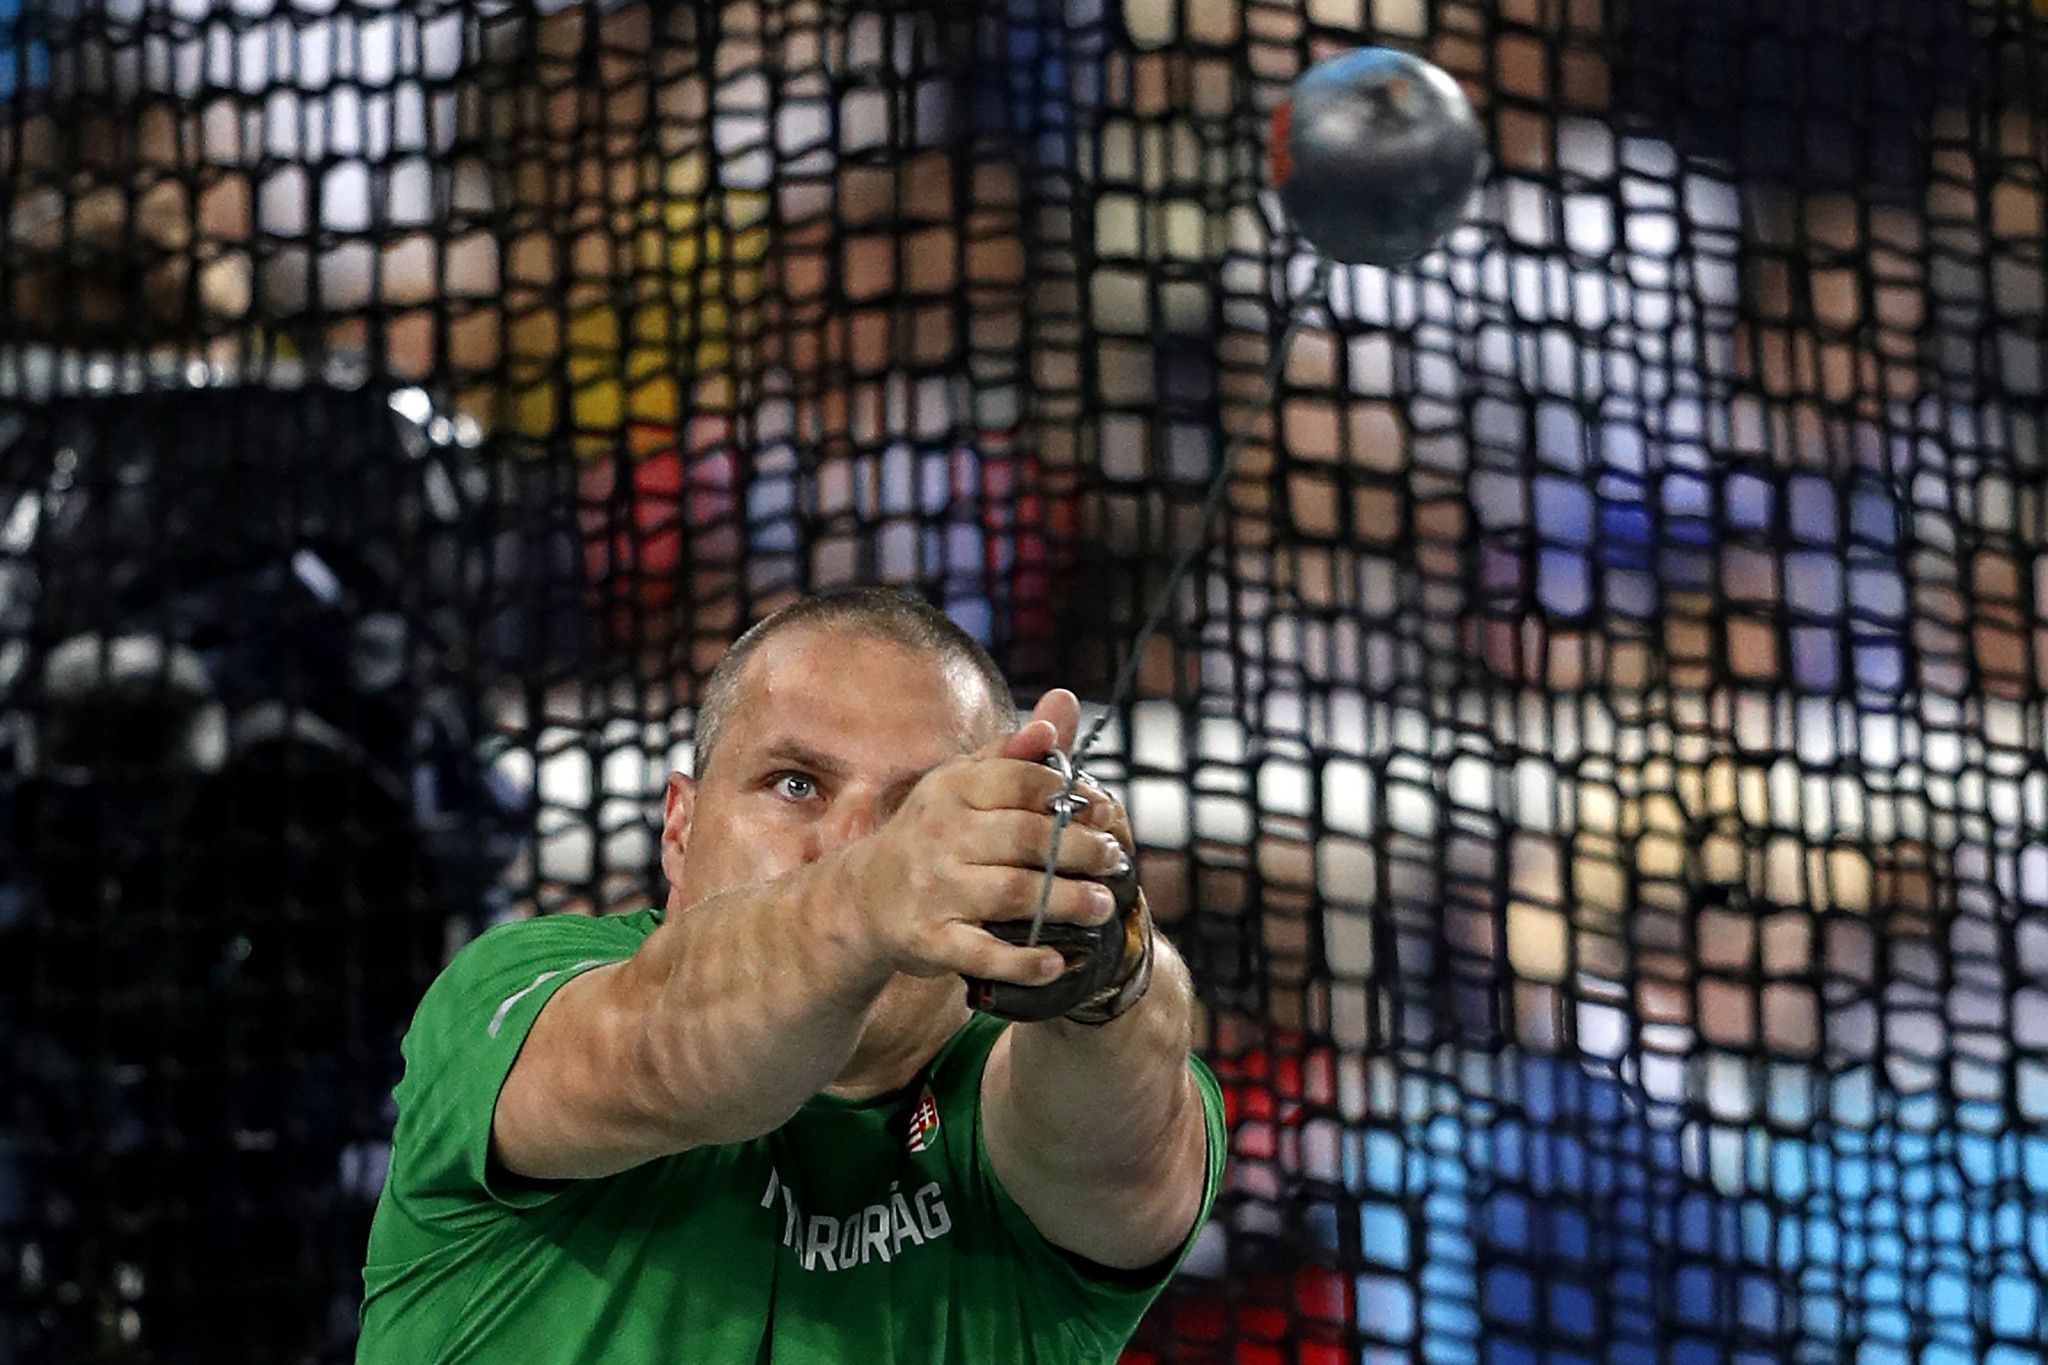 London 2012 Olympic hammer champion banned after positive drugs test